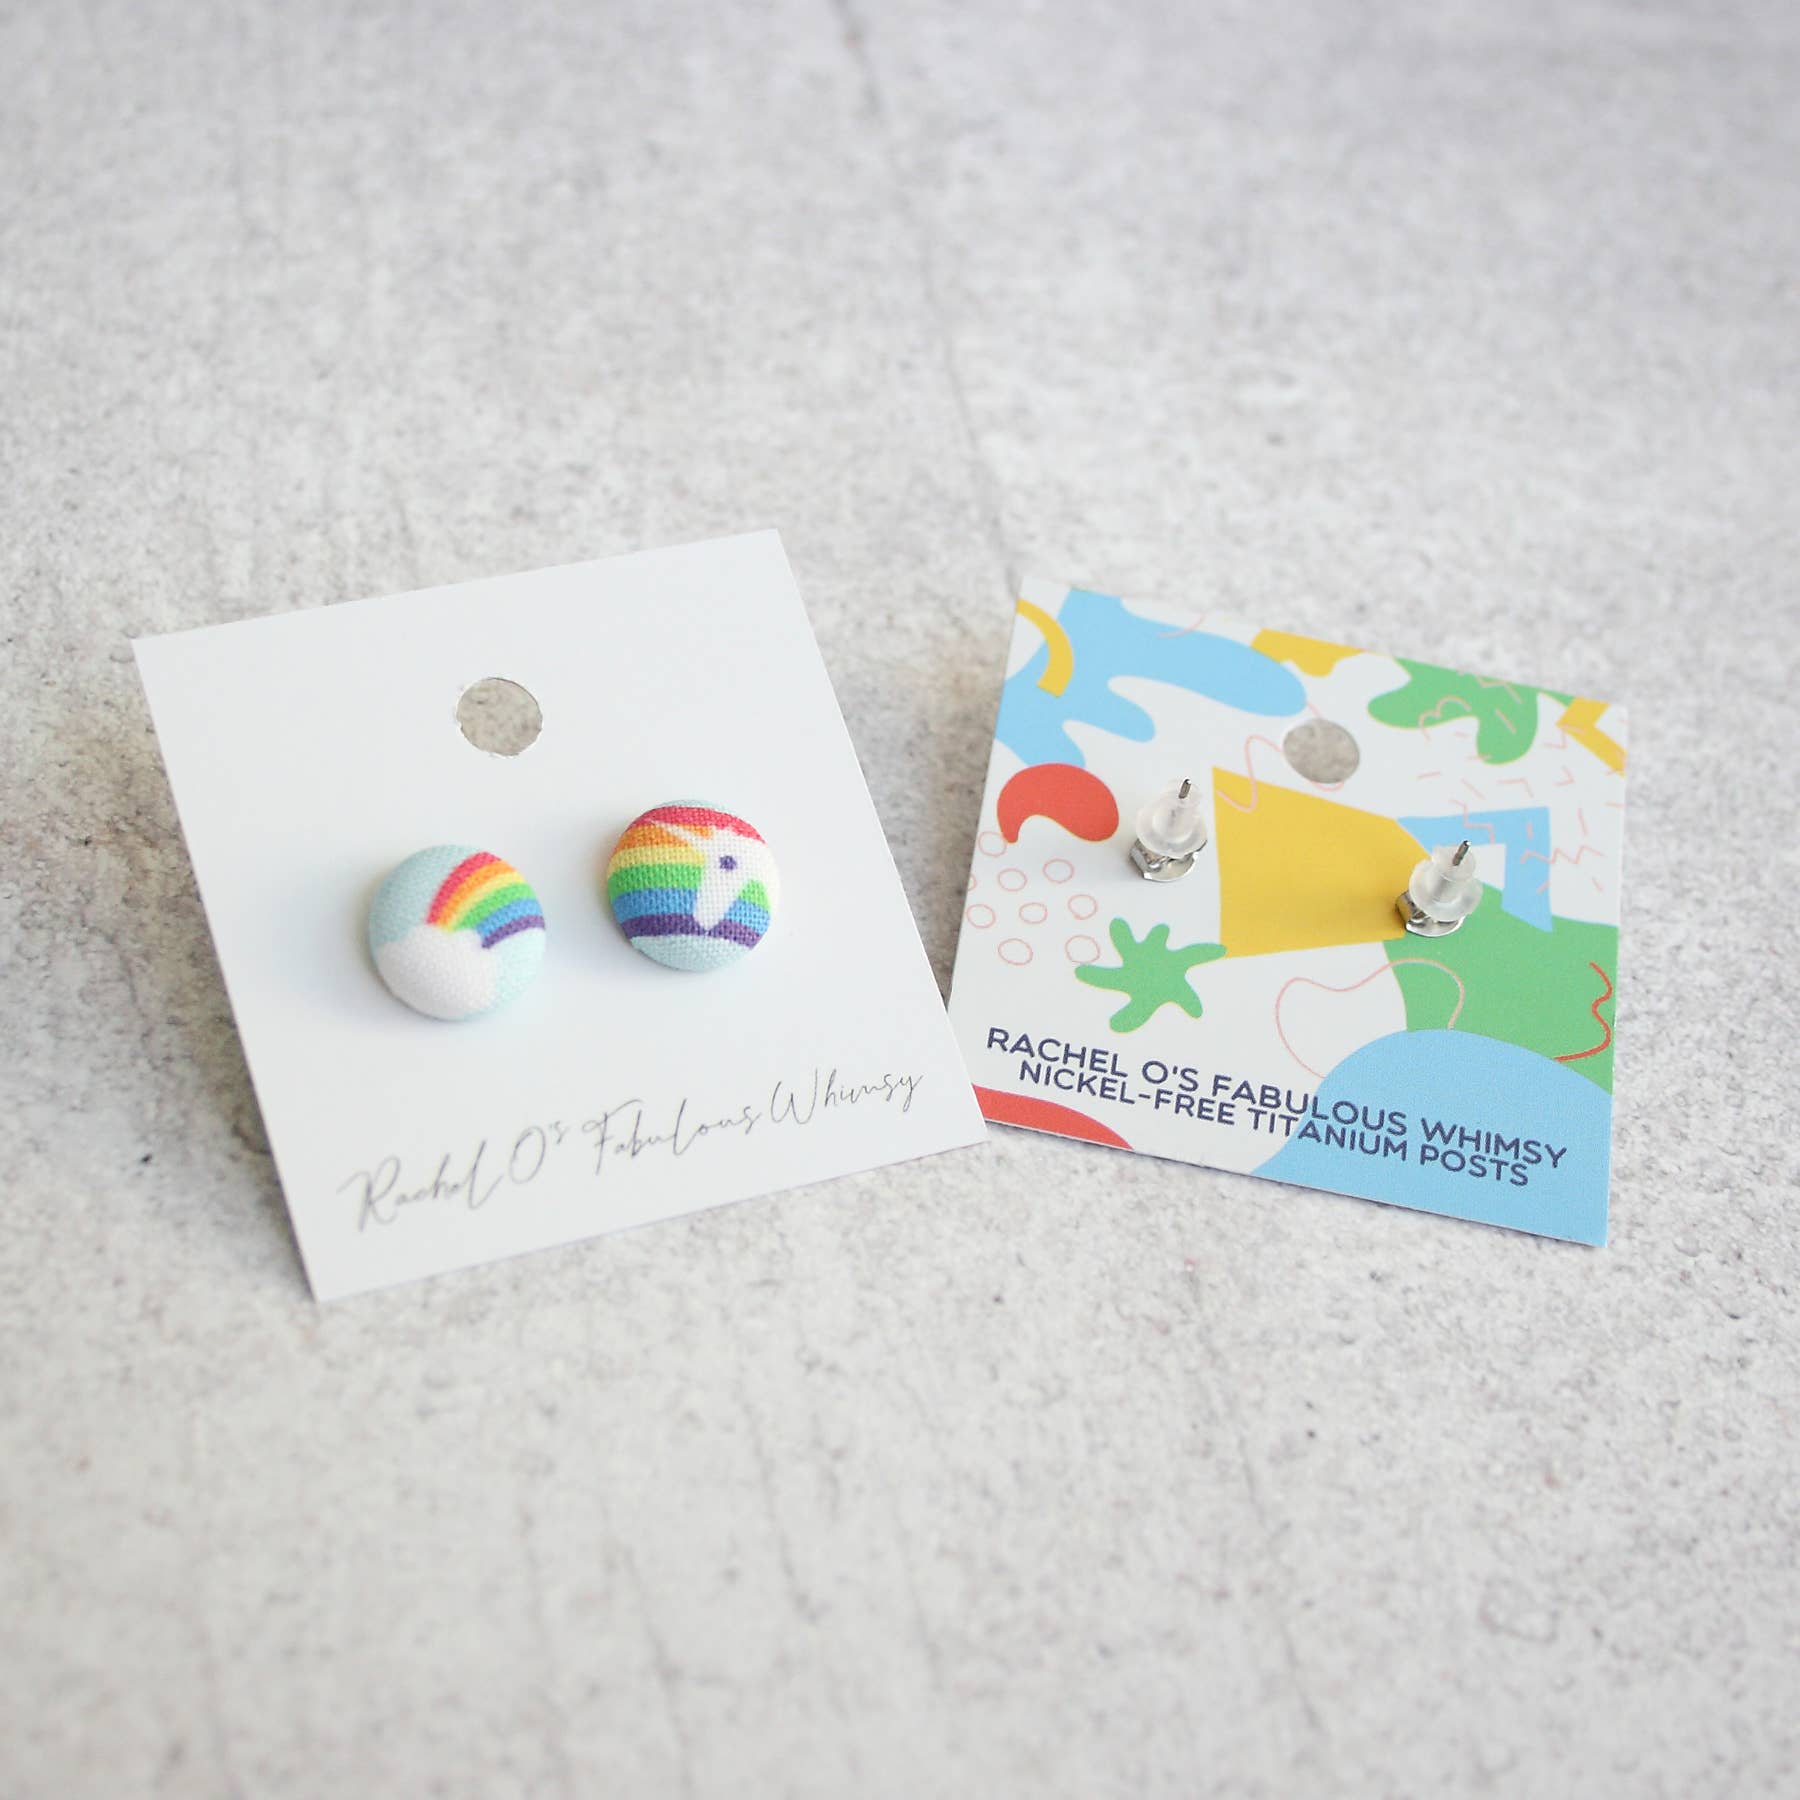 Seaside Sunset Fabric Button Earrings | Handmade in the US